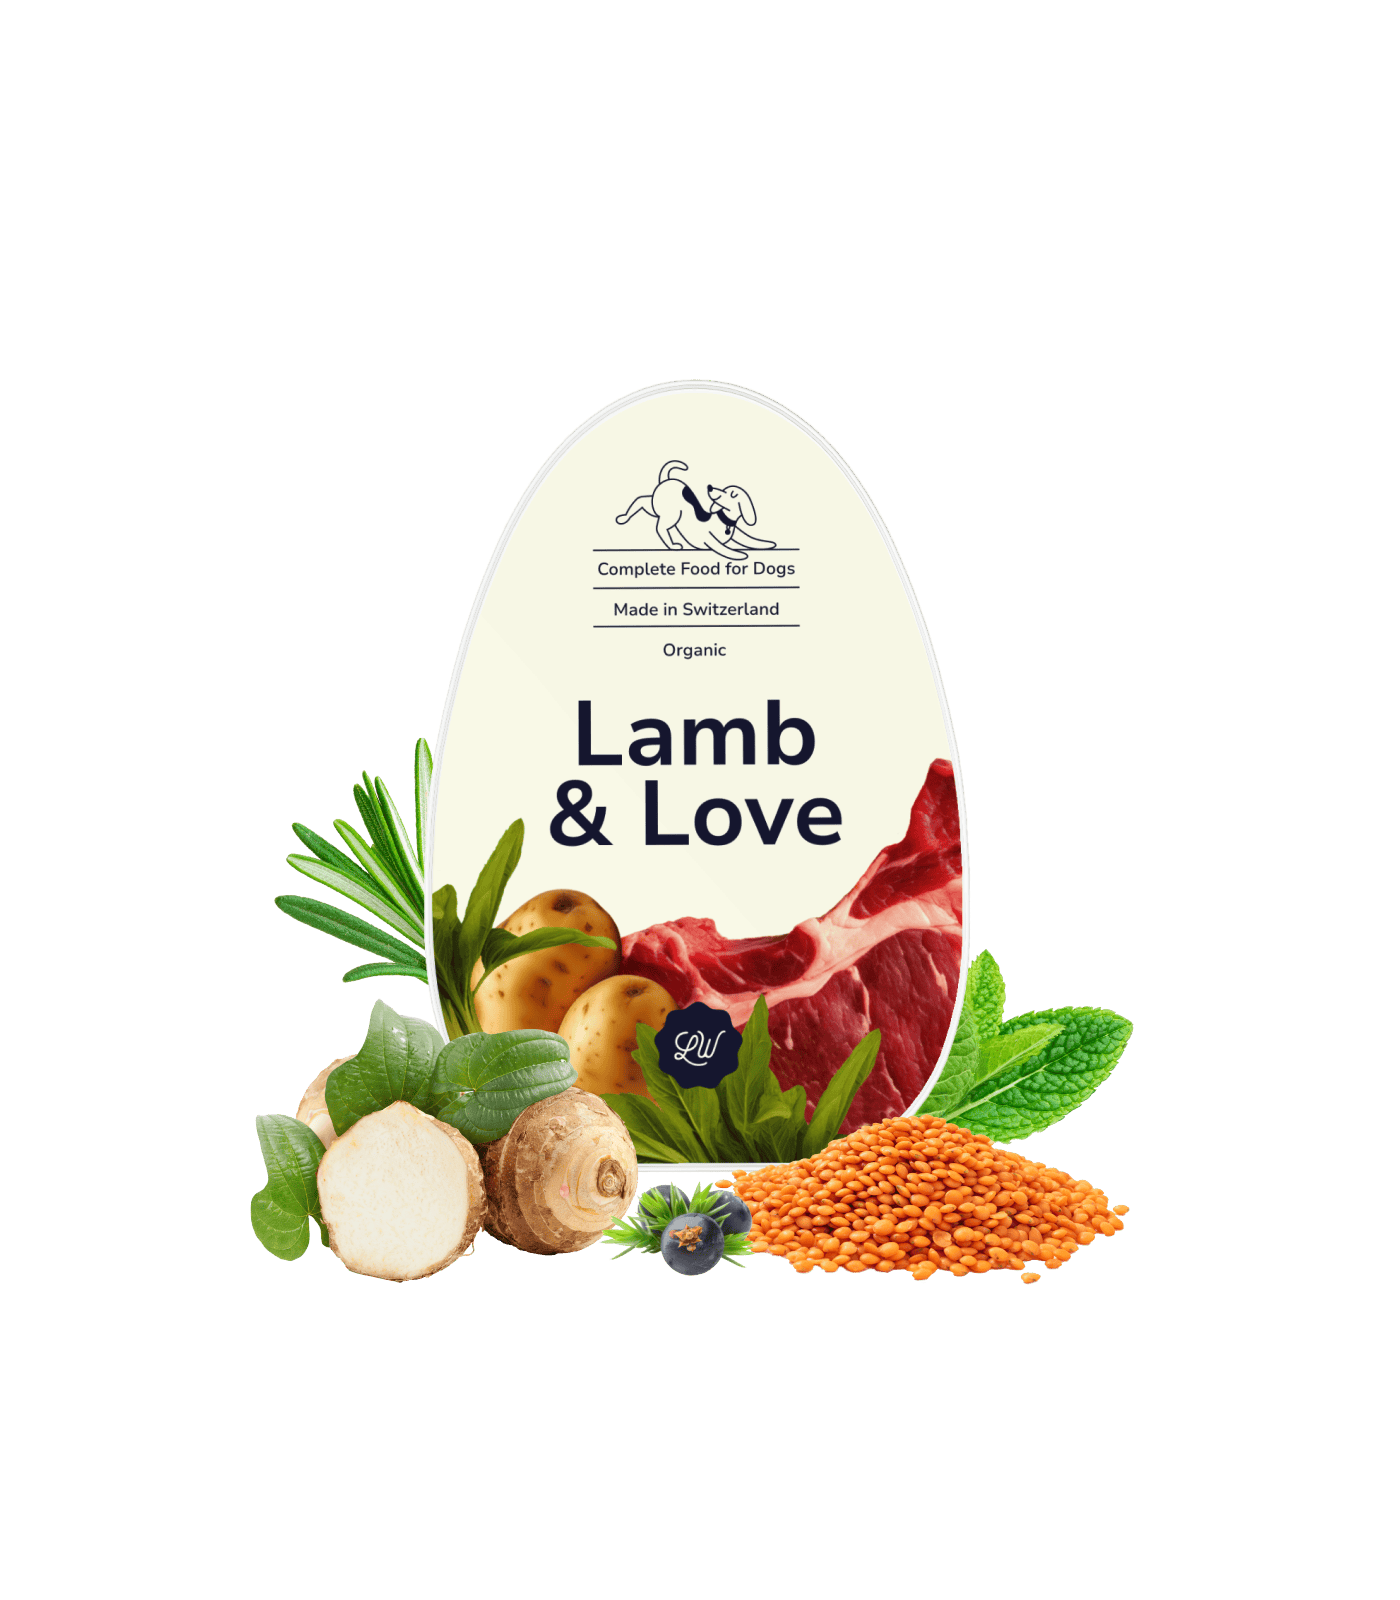 LOONAWELL's Complete Food for Dogs, Lamb & Love to go above and beyond your dog's dietary needs. Organic and human grade. Made in Switzerland.